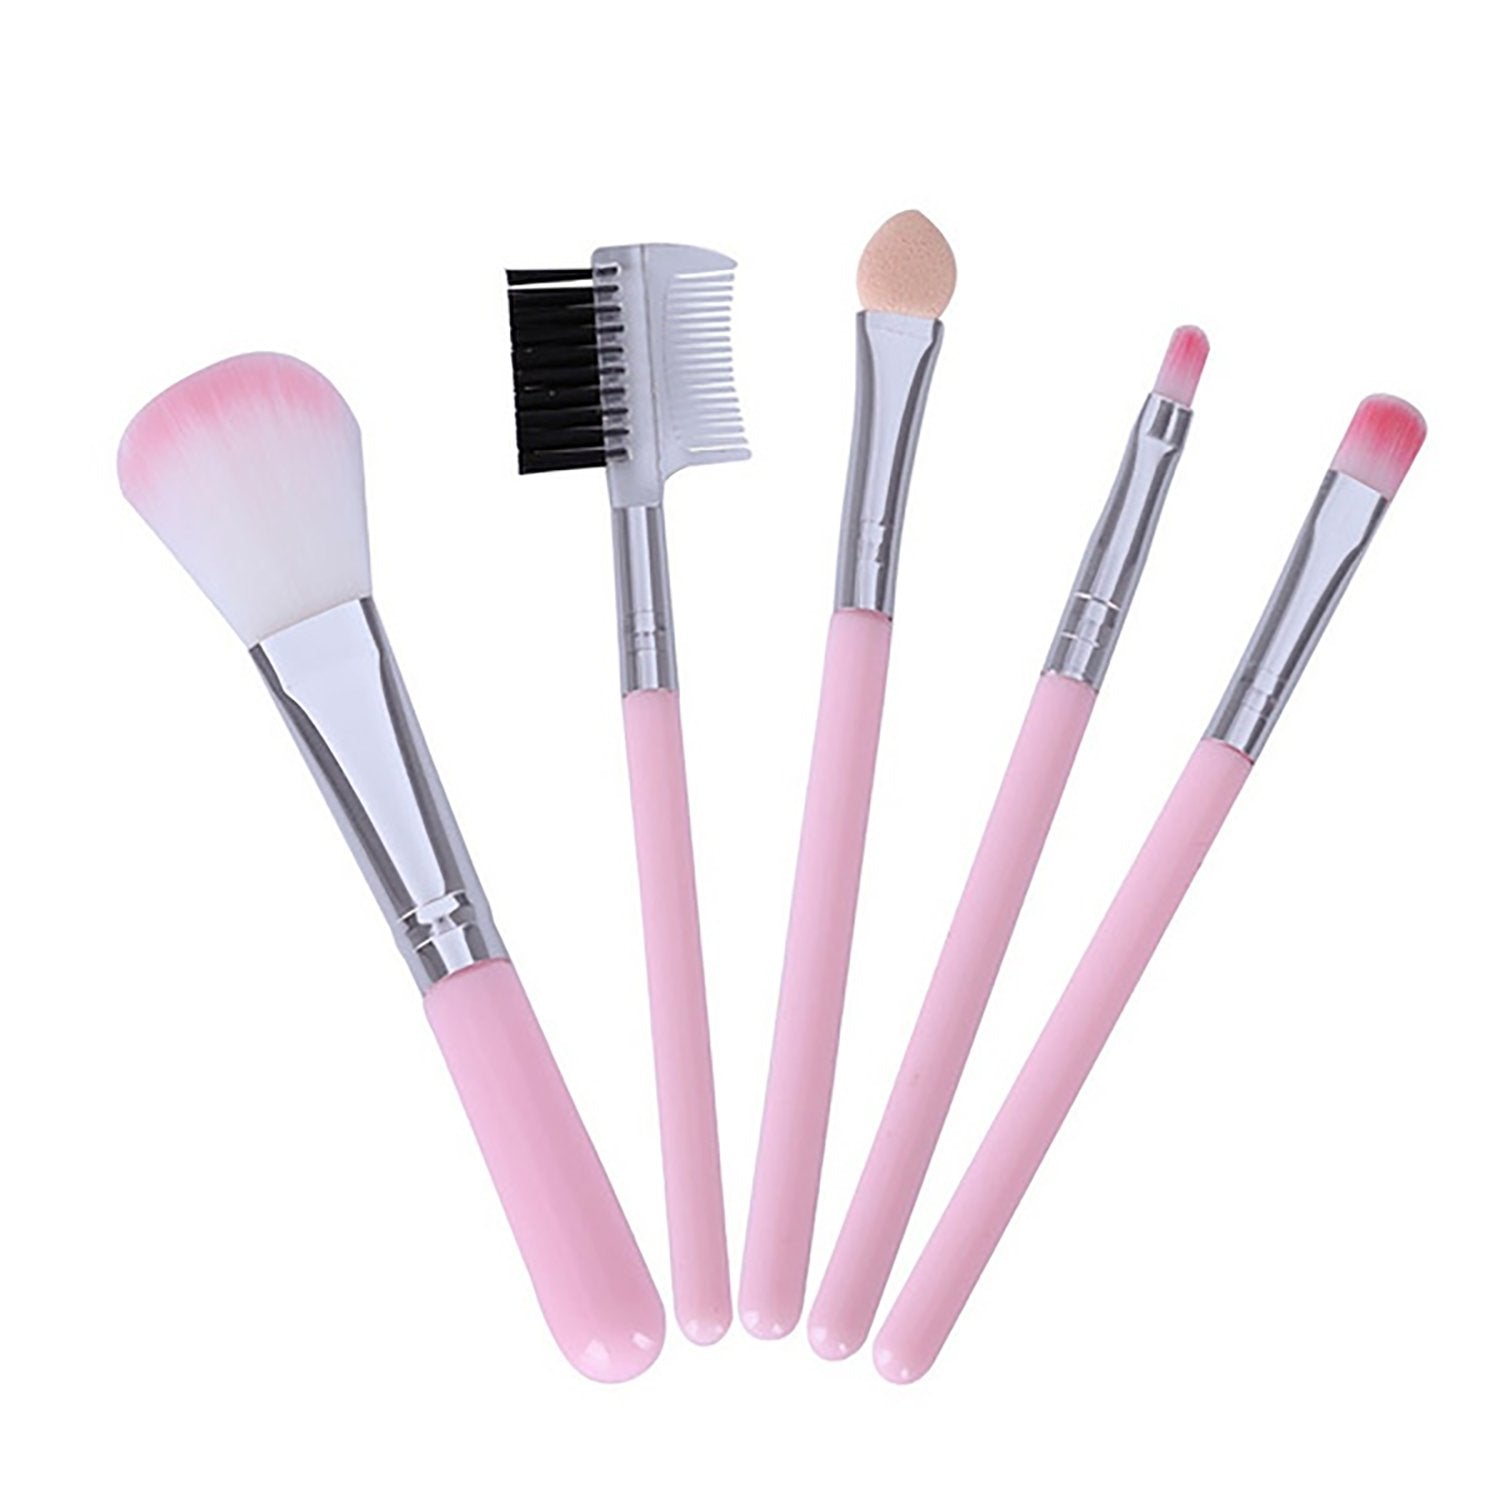 6231 5pc Makeup tools kit for girls and women 